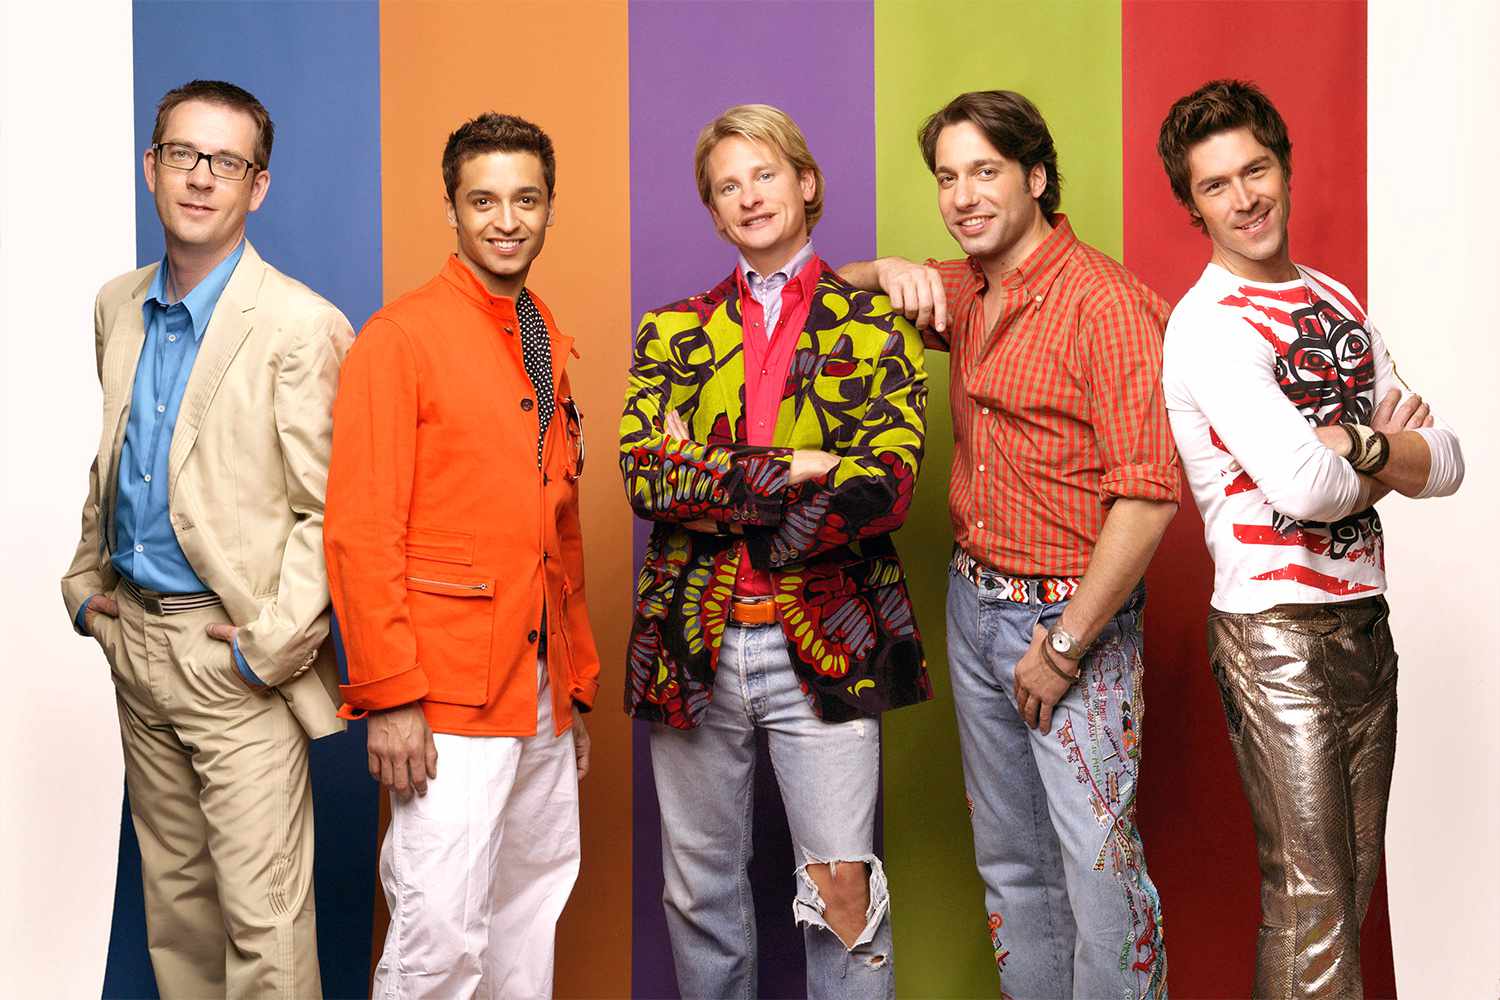 QUEER EYE FOR THE STRAIGHT GUY, 2003